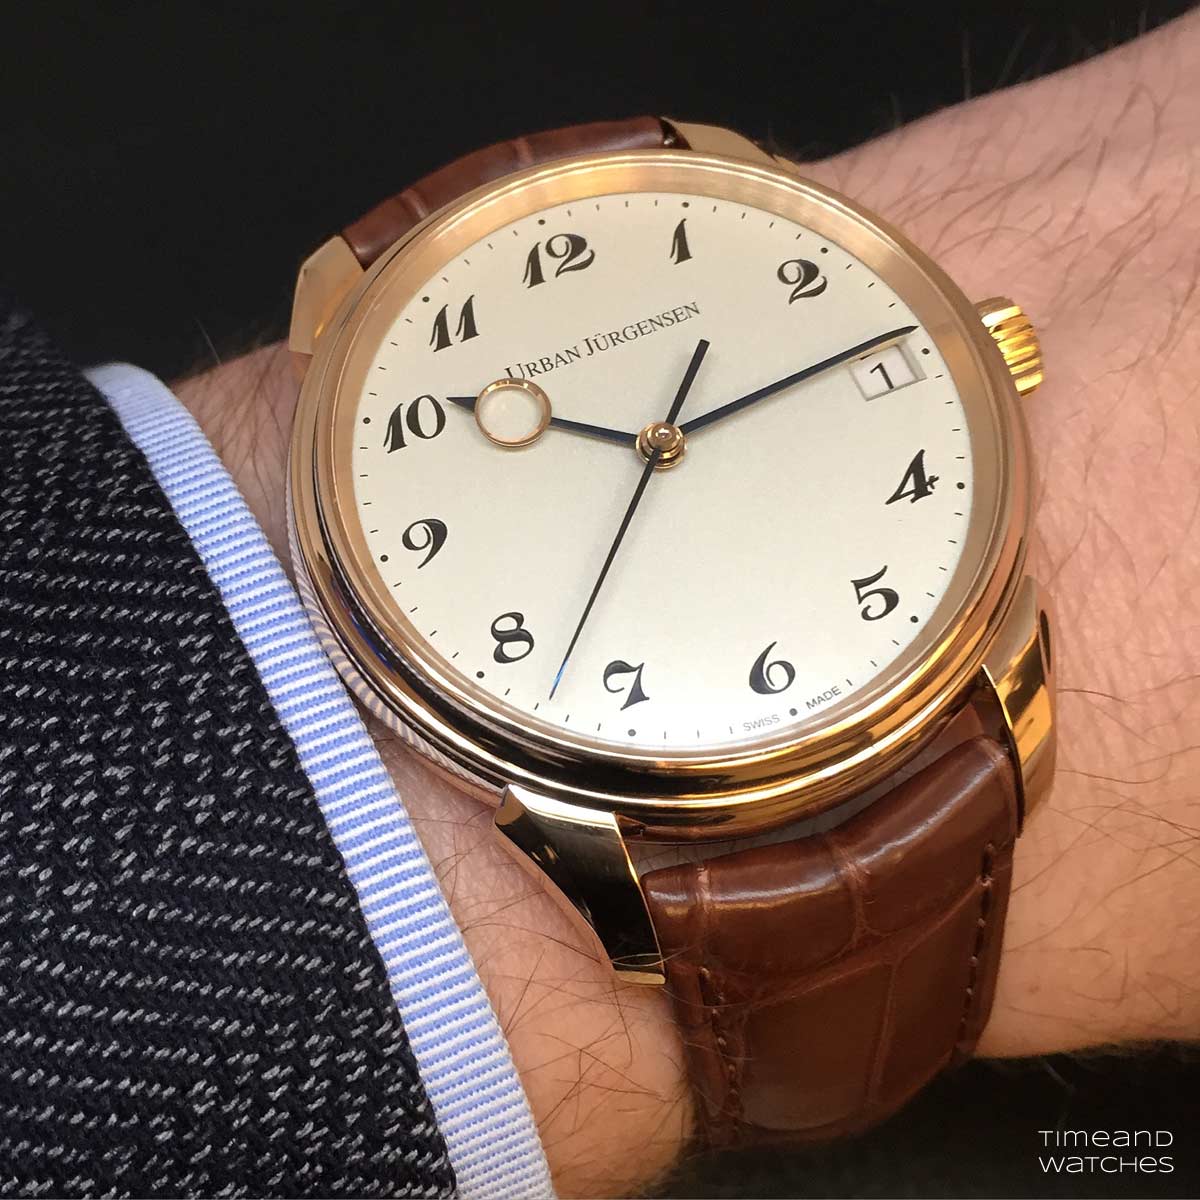 Urban Jürgensen - Jules Collection Ref. 2240 and Ref. 2340 | Time and ...